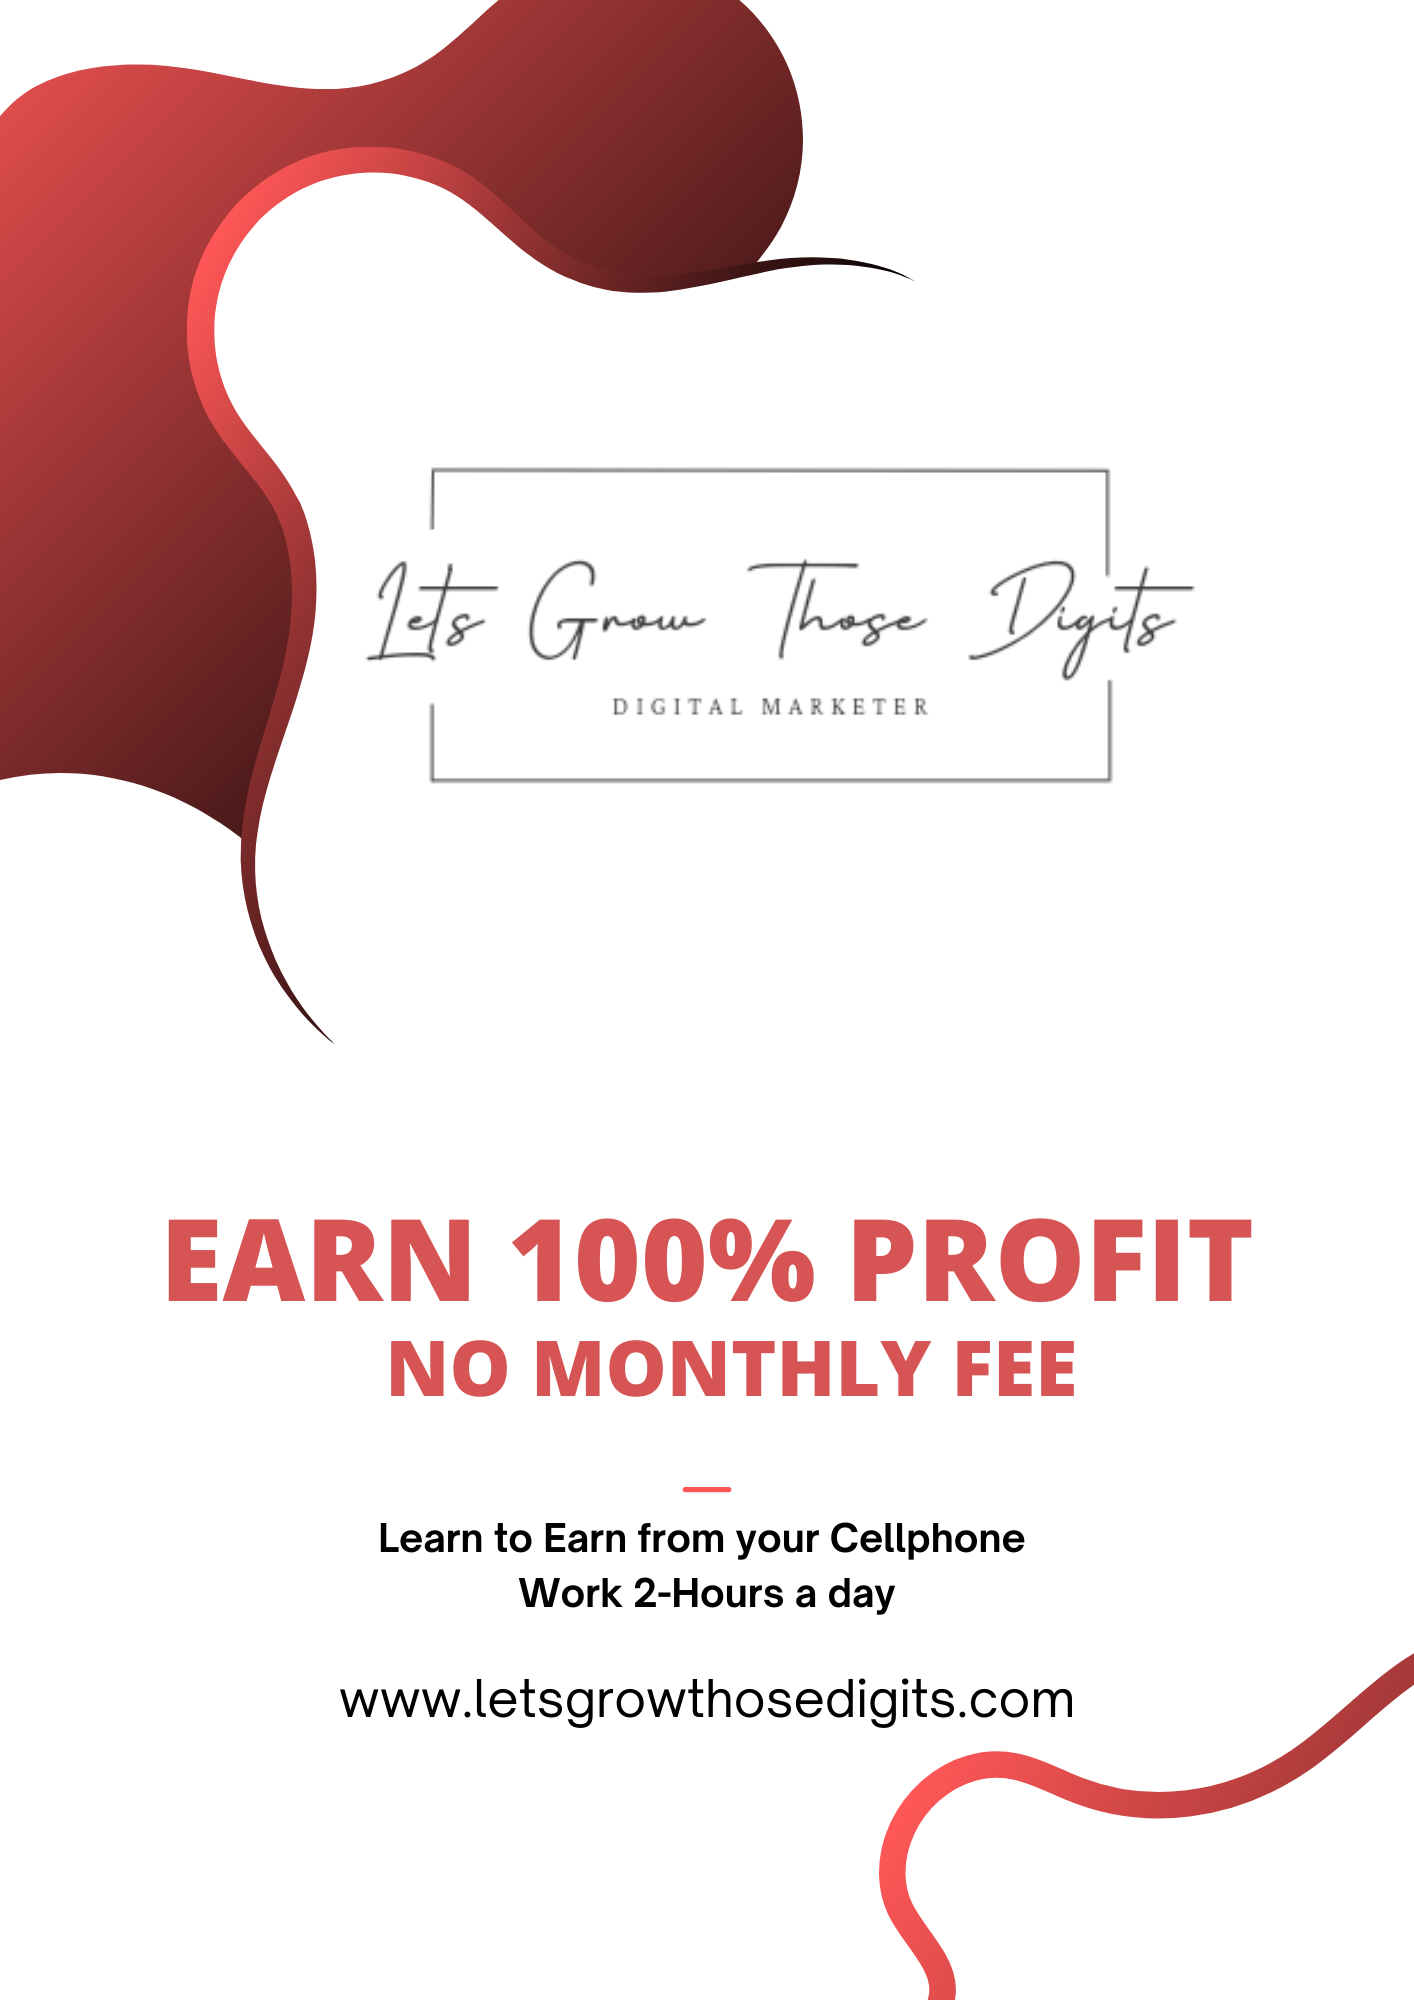 Start your $100 daily pay today. Work for just 2 hours a day! - Houston Sales, Marketing